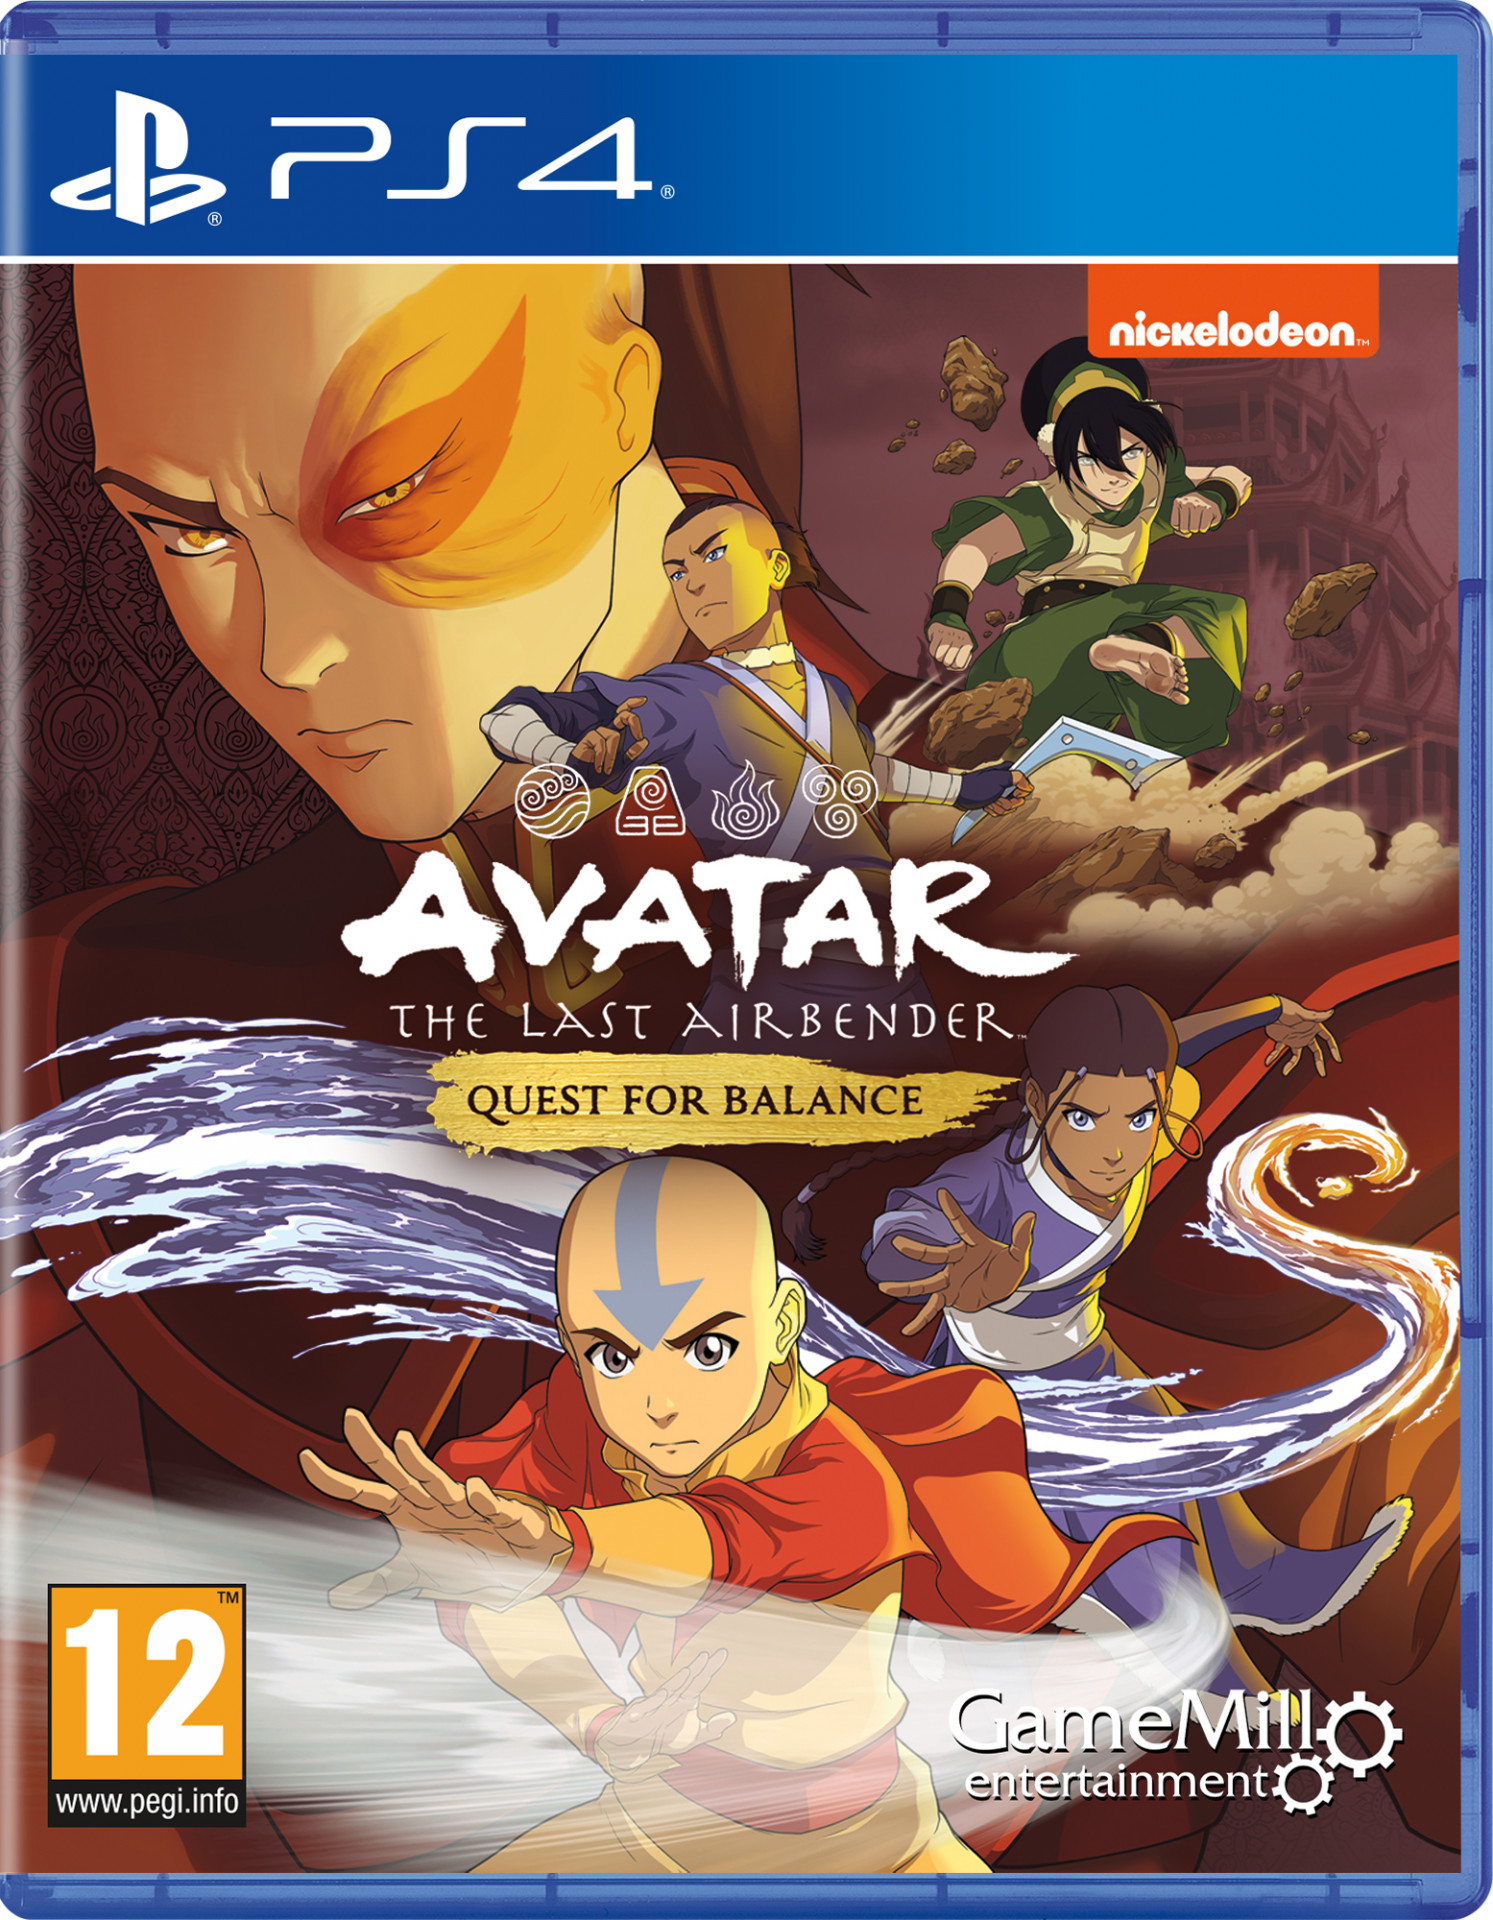 Avatar The Last Airbender: Quest for Balance (PS4), GameMill Entertainment